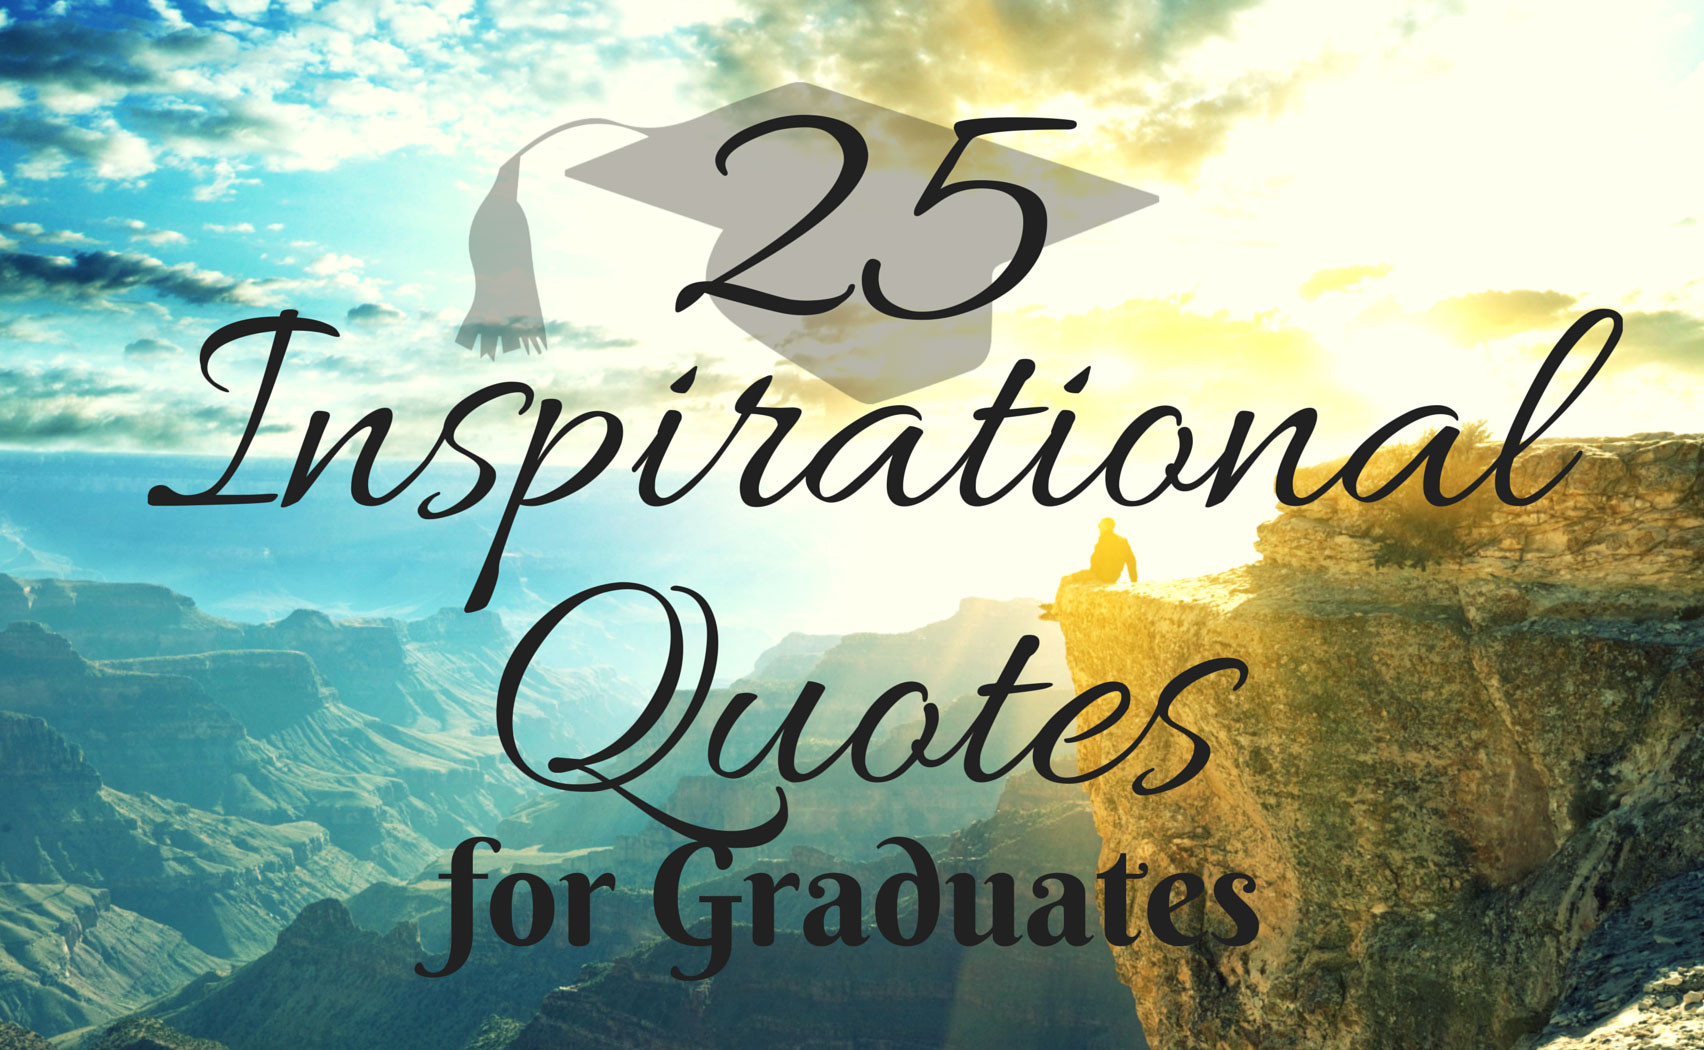 Quote About Graduation From High School
 Graduation Quotes For Elementary Students QuotesGram